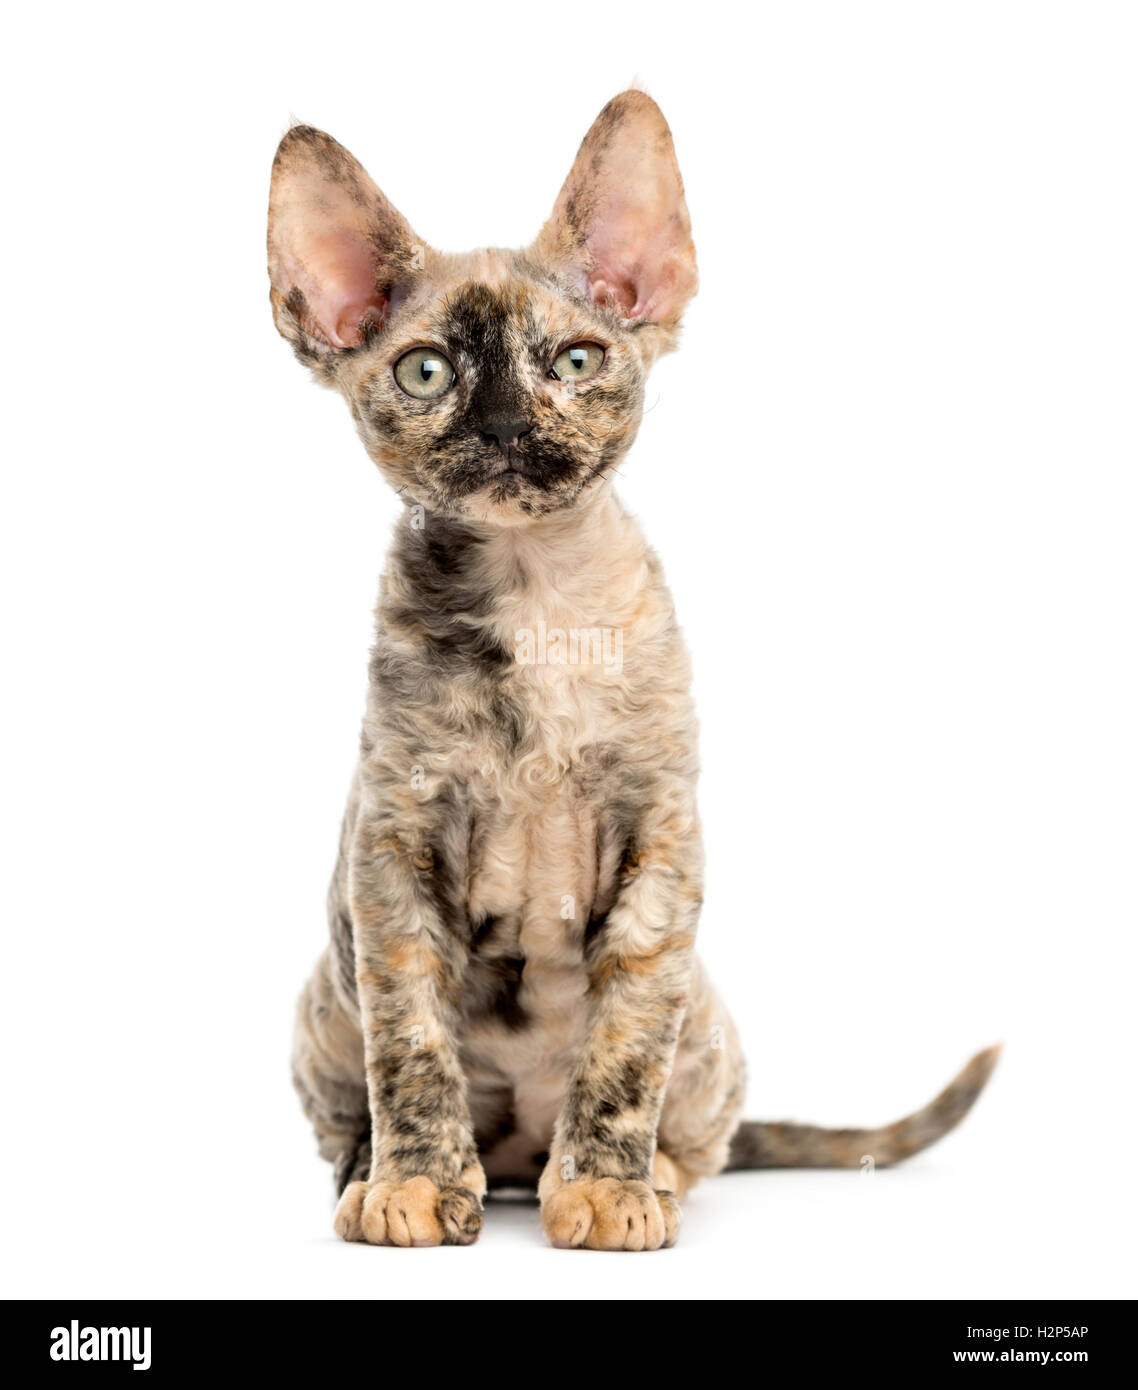 Devon Rex cat sitting isolated on white Banque D'Images